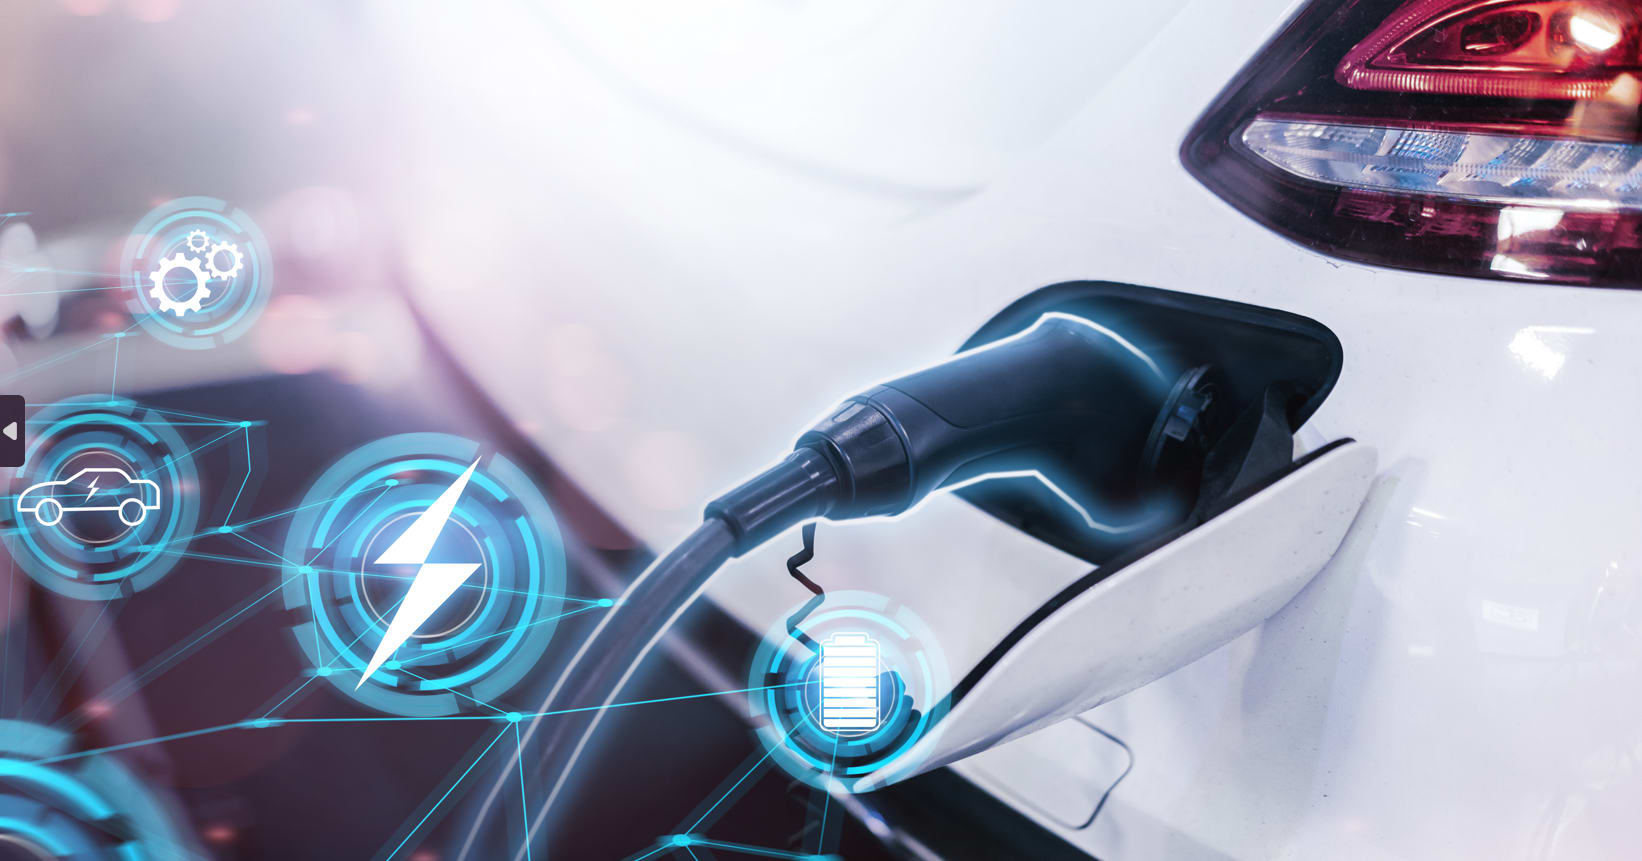 Electric fleets can save costs and improve productivity with smarter charging